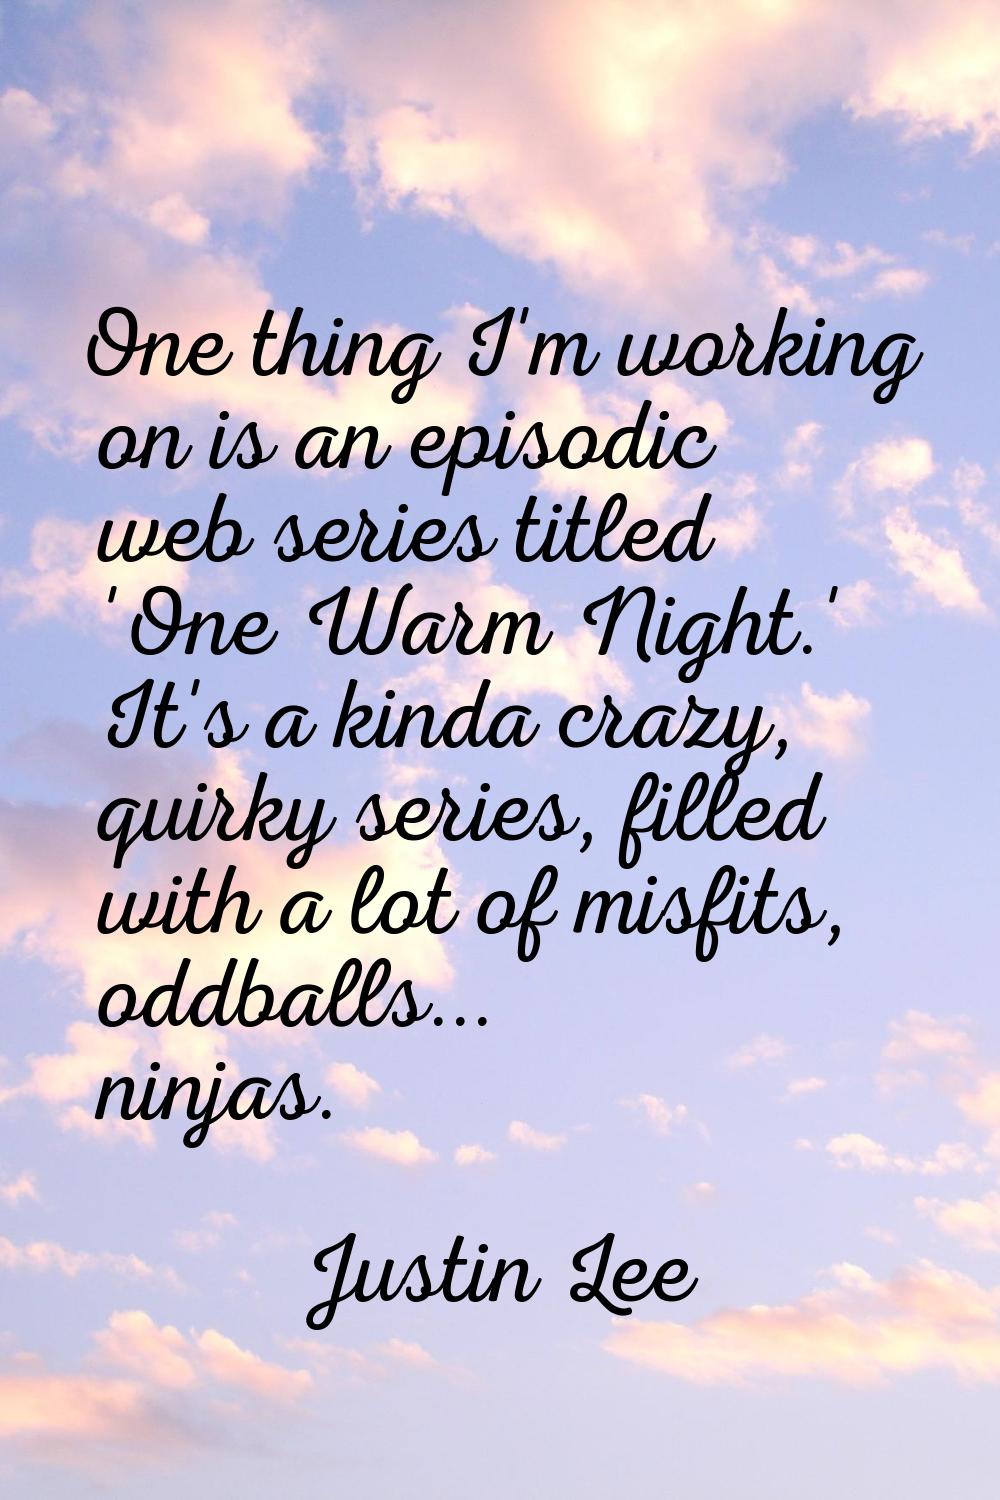 One thing I'm working on is an episodic web series titled 'One Warm Night.' It's a kinda crazy, qui